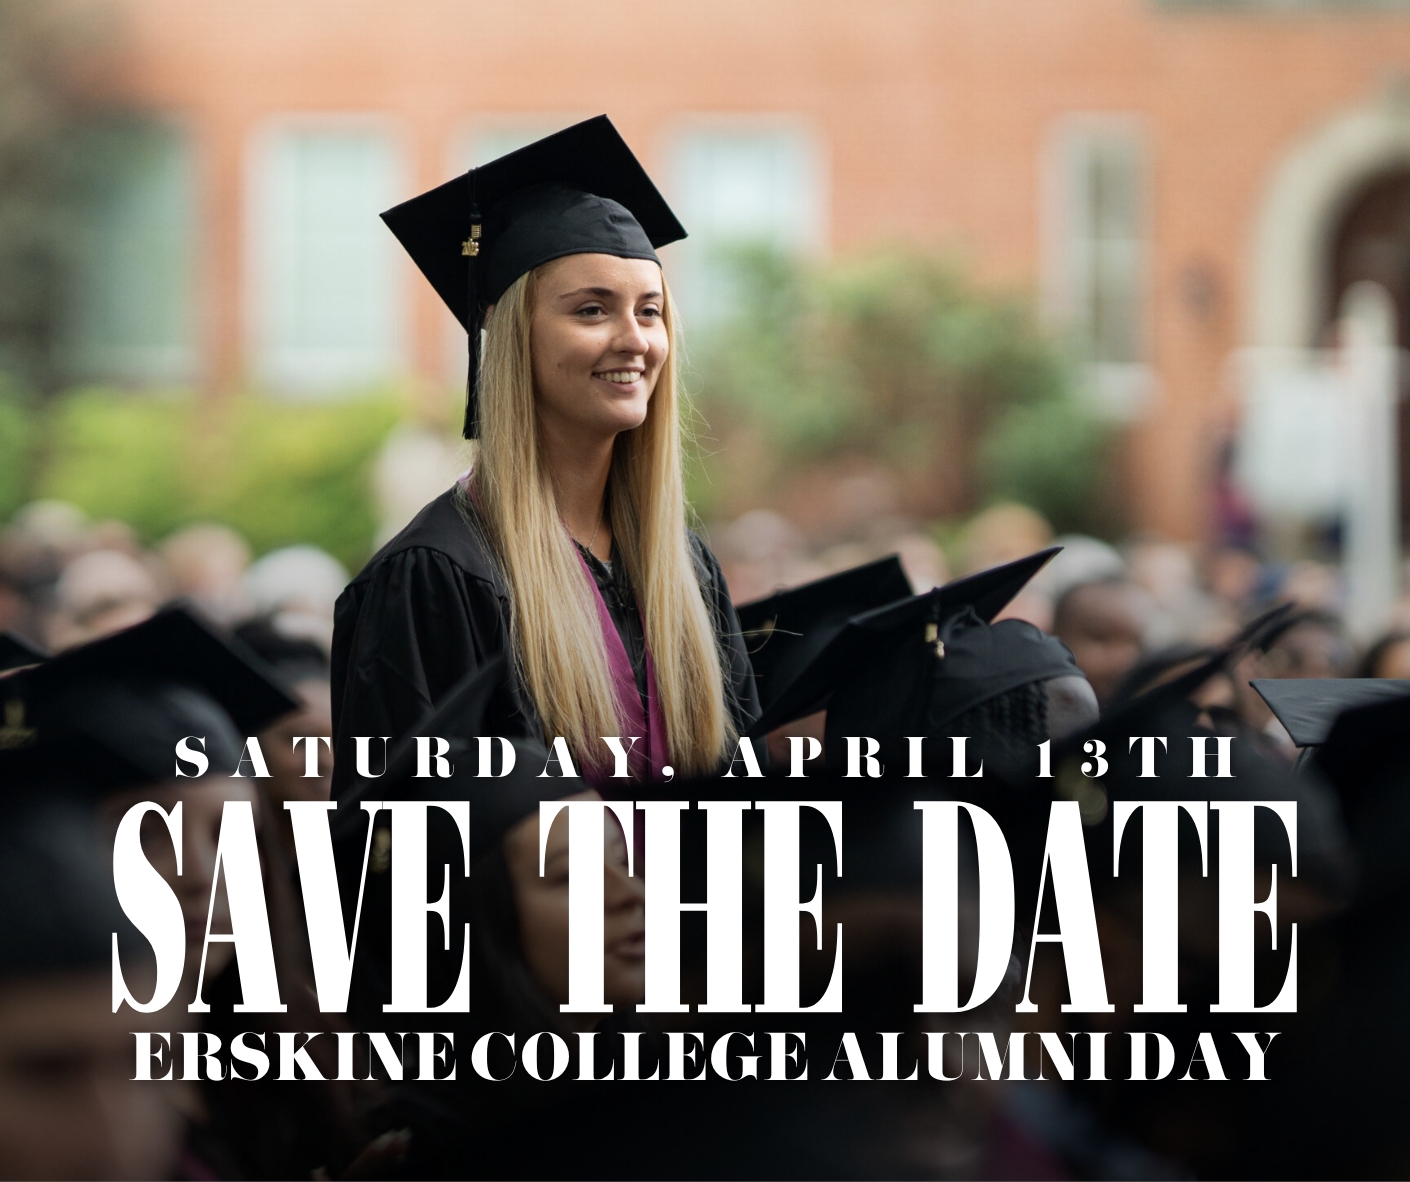 Save the date for the Erskine College Alumni Day: Saturday, April 13th